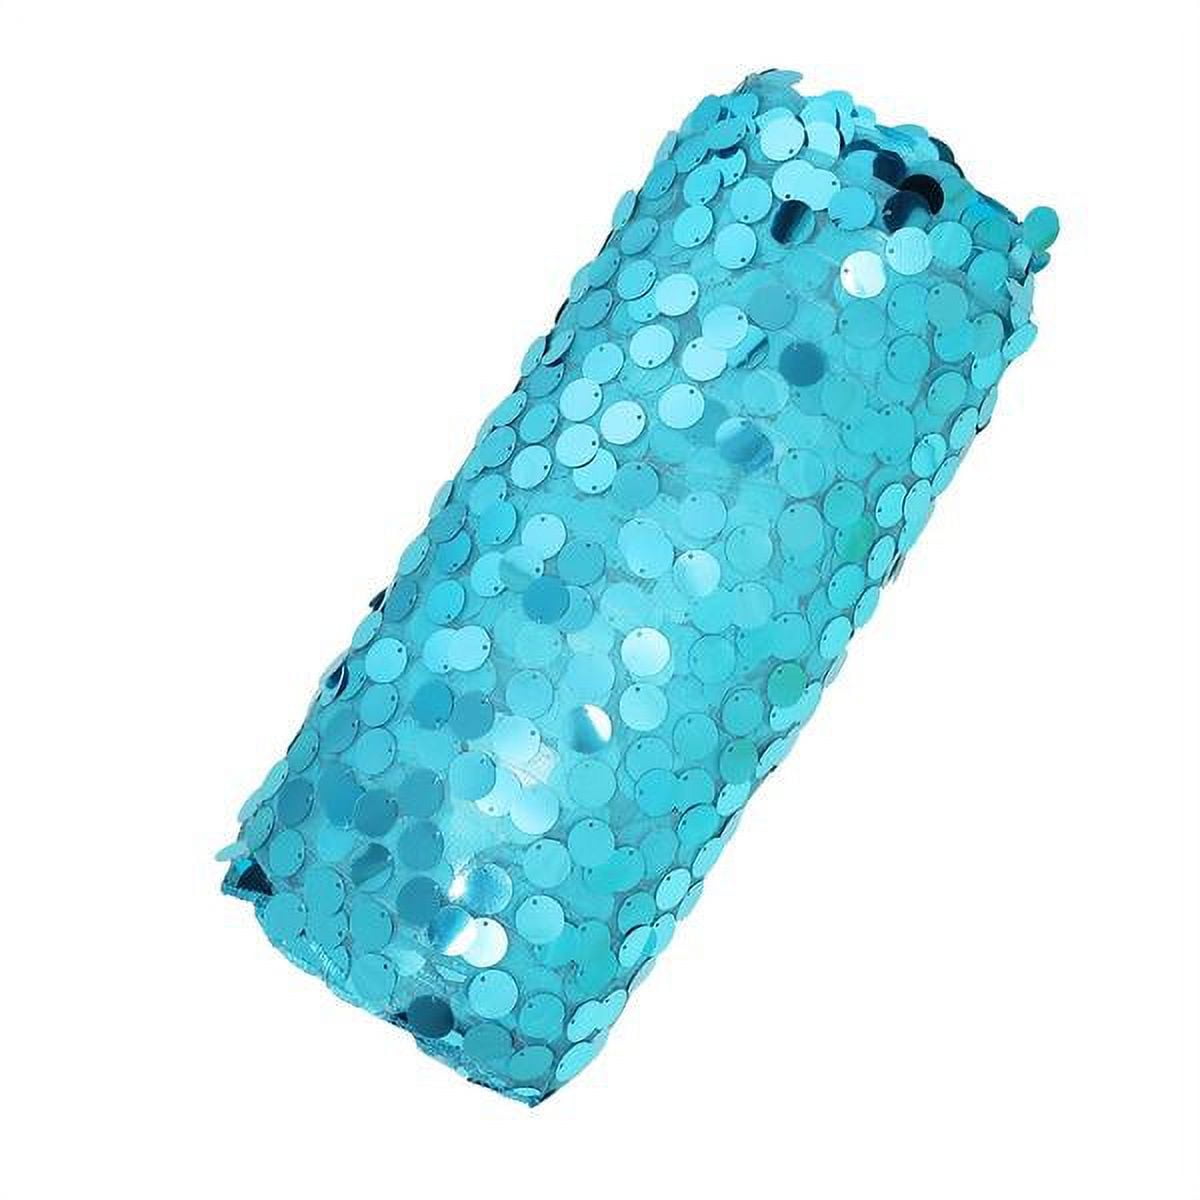 BalsaCircle 1 lb Turquoise Chunky Art Crafts Glitter Wedding Party